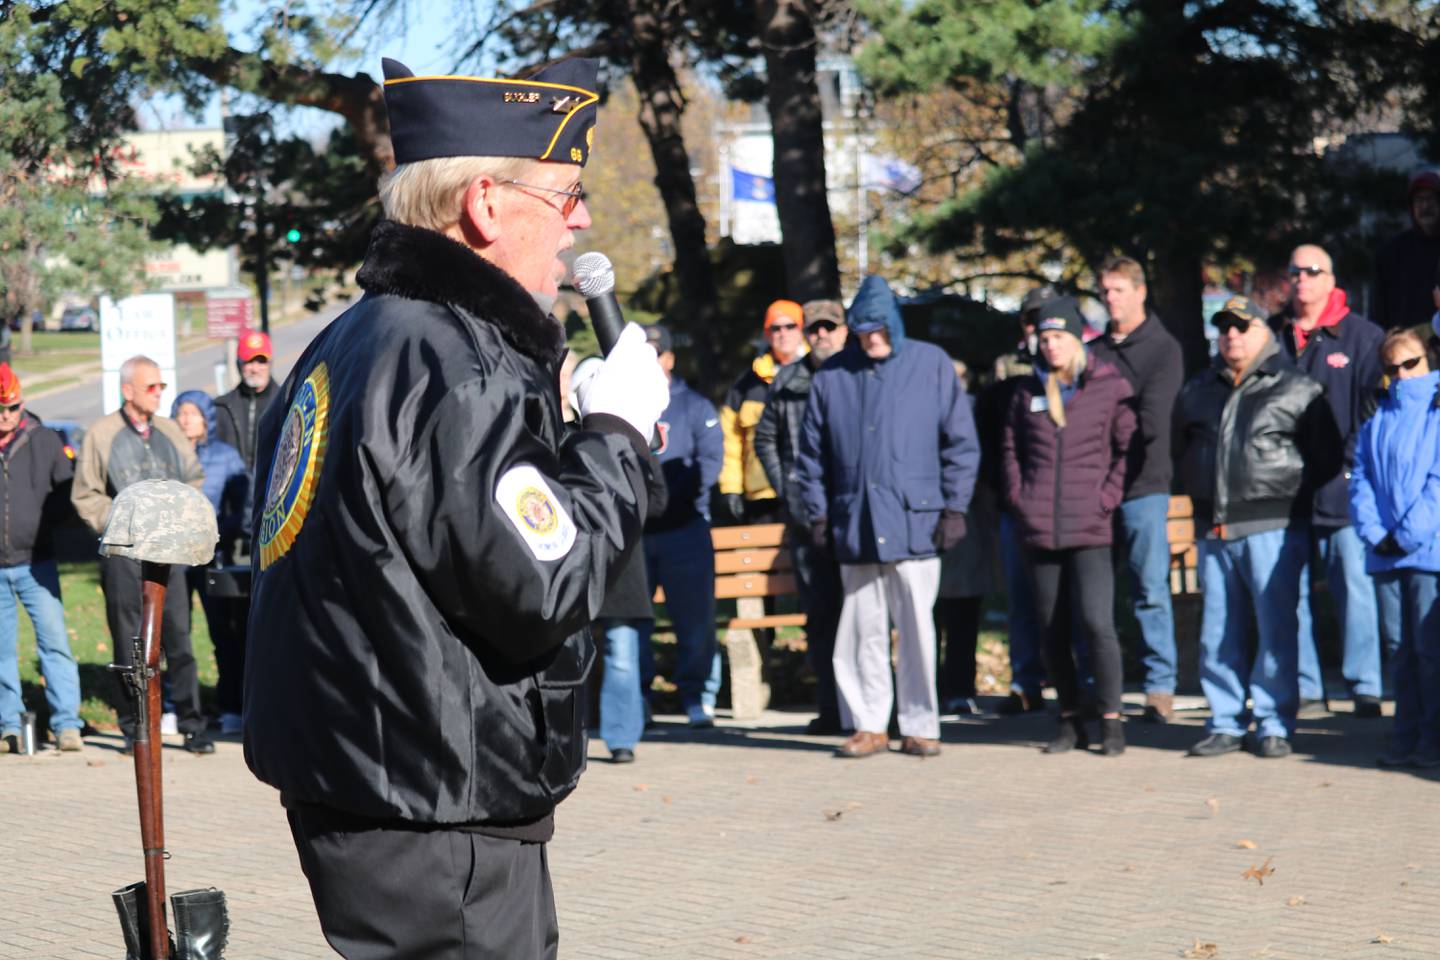 Michael Embrey, the ceremony's host and a local veteran, gives remarks Nov. 11, 2022 at a Veterans Day Ceremony in downtown DeKalb.